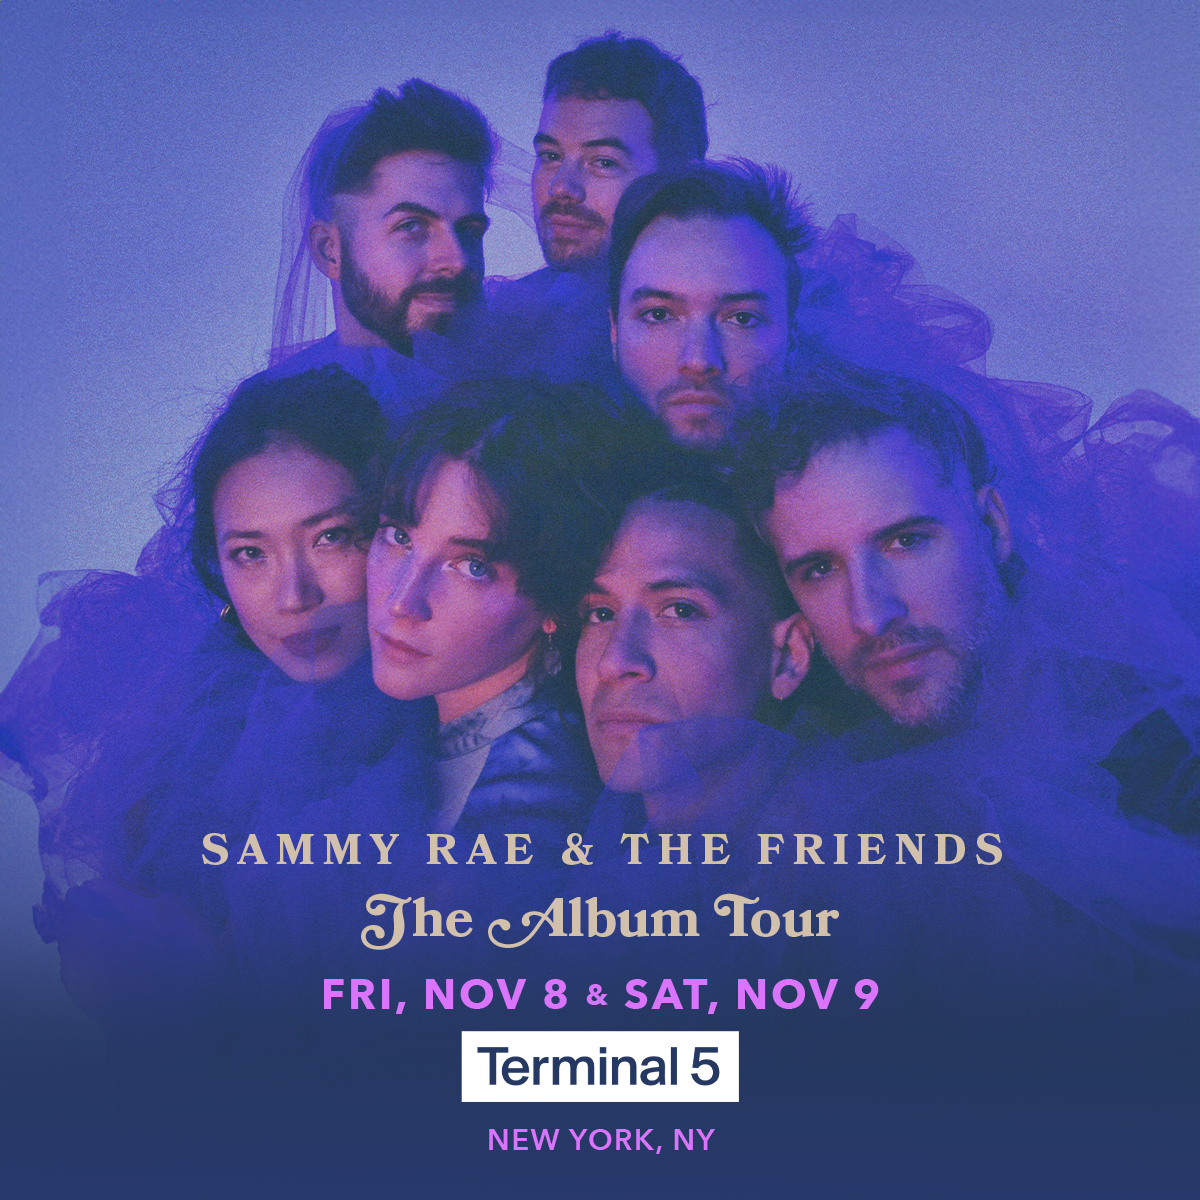 JUST ANNOUNCED: Sammy Rae & The Friends are coming fri, nov 8 & sat, nov 9 to NYC 💜 tickets go on sale friday at 10am